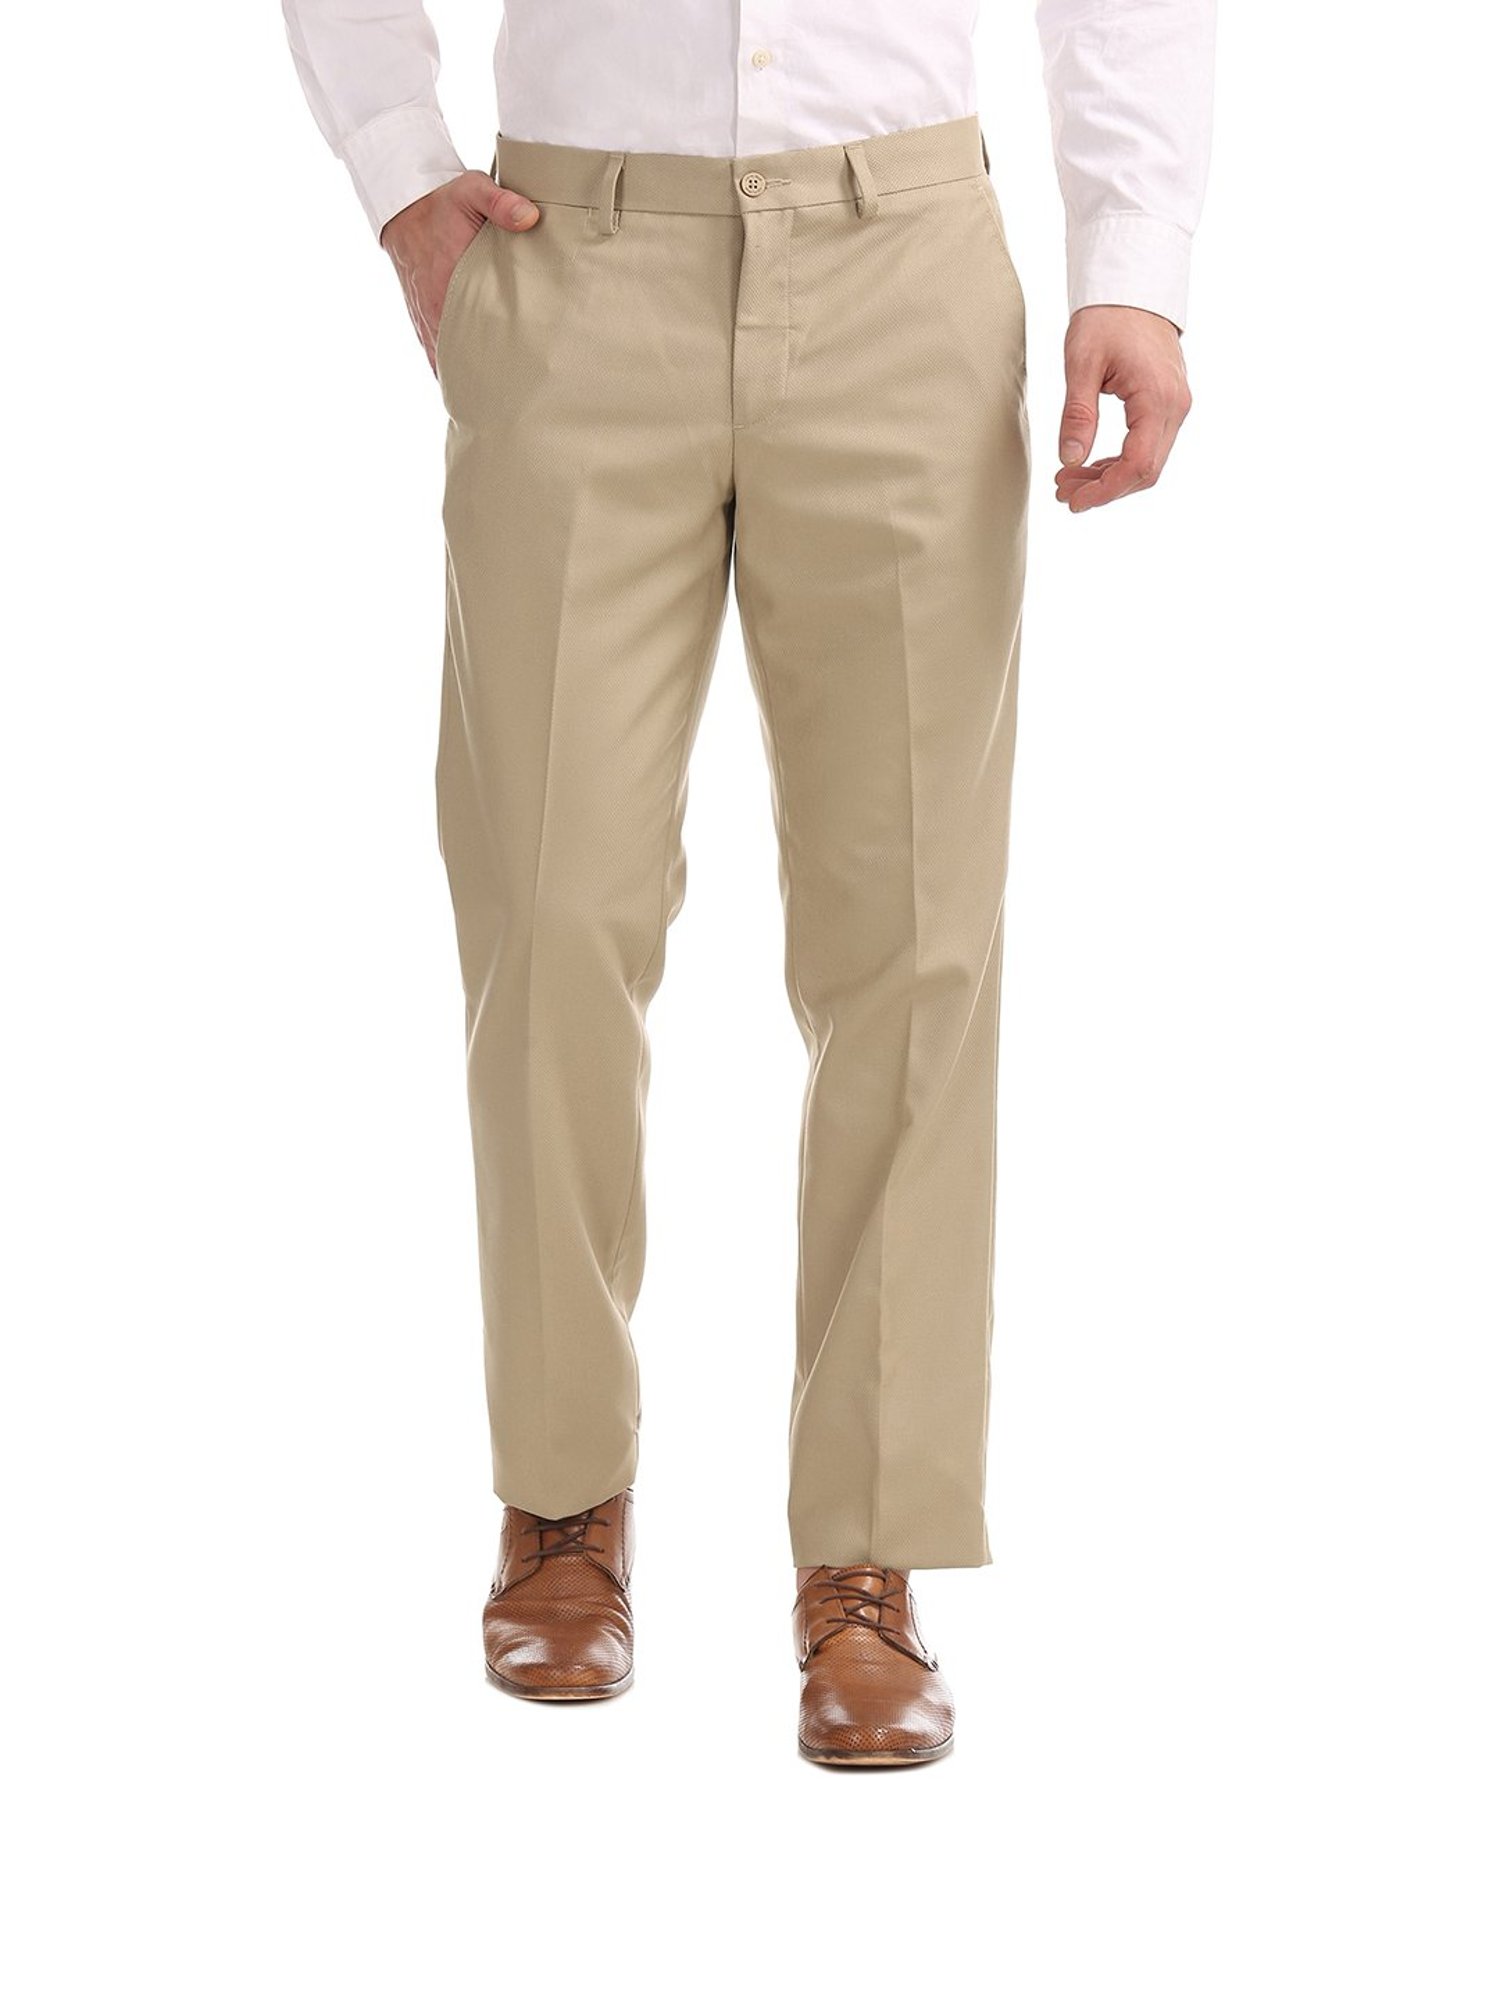 Excalibur by Unlimited Mens Slim Slim Fit Poly Viscose Formal Trousers  400016060676Beige30W x 35L  Amazonin Fashion